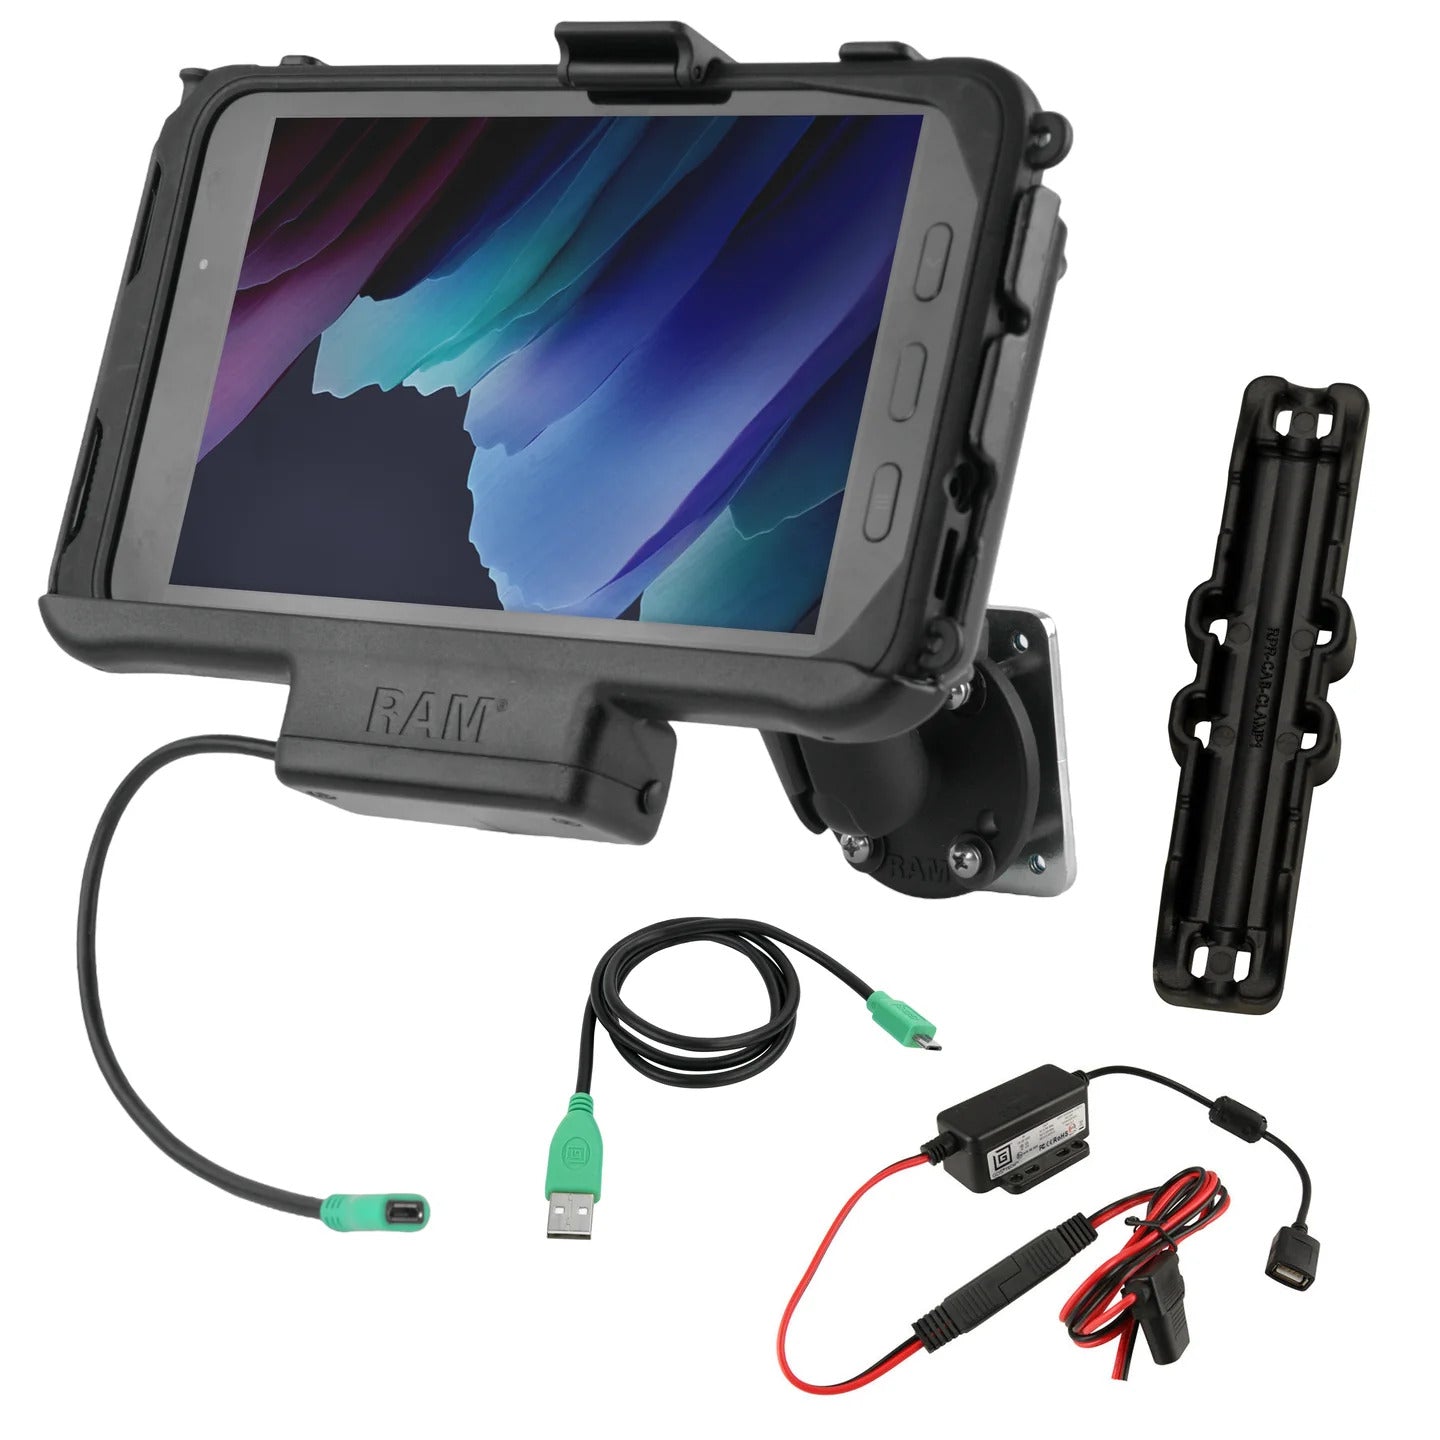 RAM Powered Cradle Tab Active5, Active3, Active2 with Hardwire Cables and Mount (RAM-B-101-225B2-SAM60P-V7B1U)